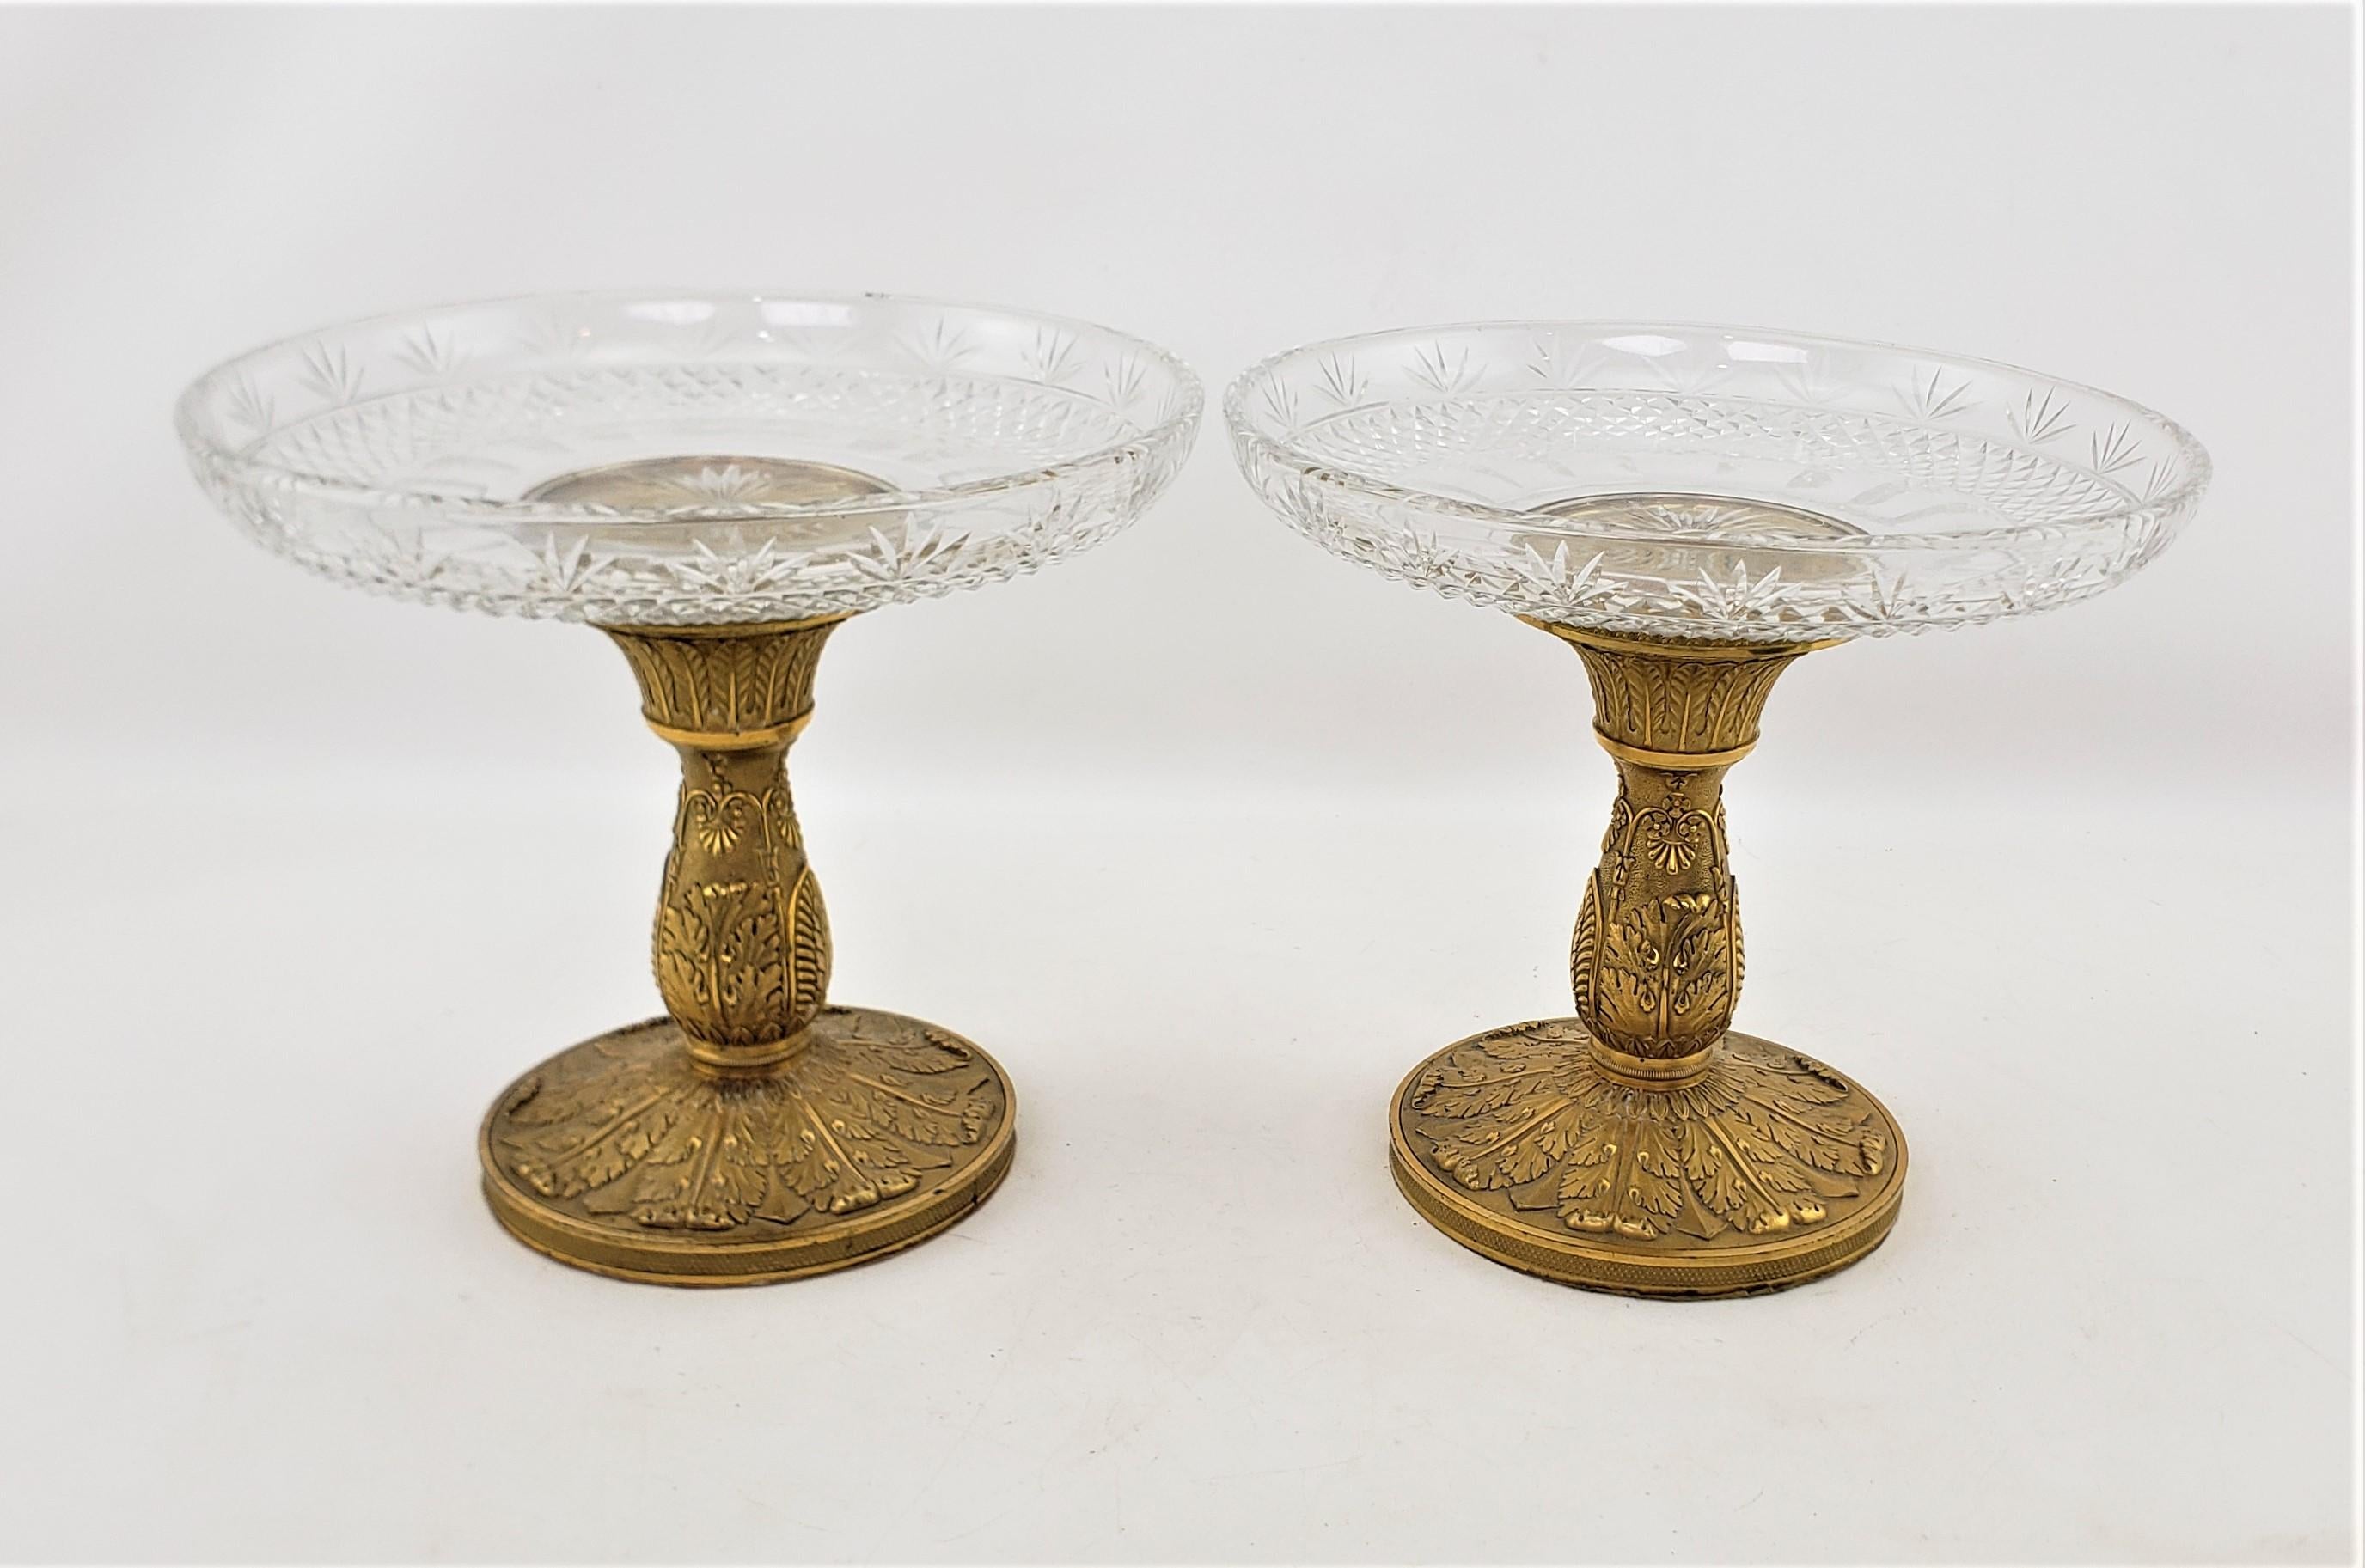 Pair of Antique Gilt Bronze & Crystal Tazzas or Pedestal Bowls For Sale 4